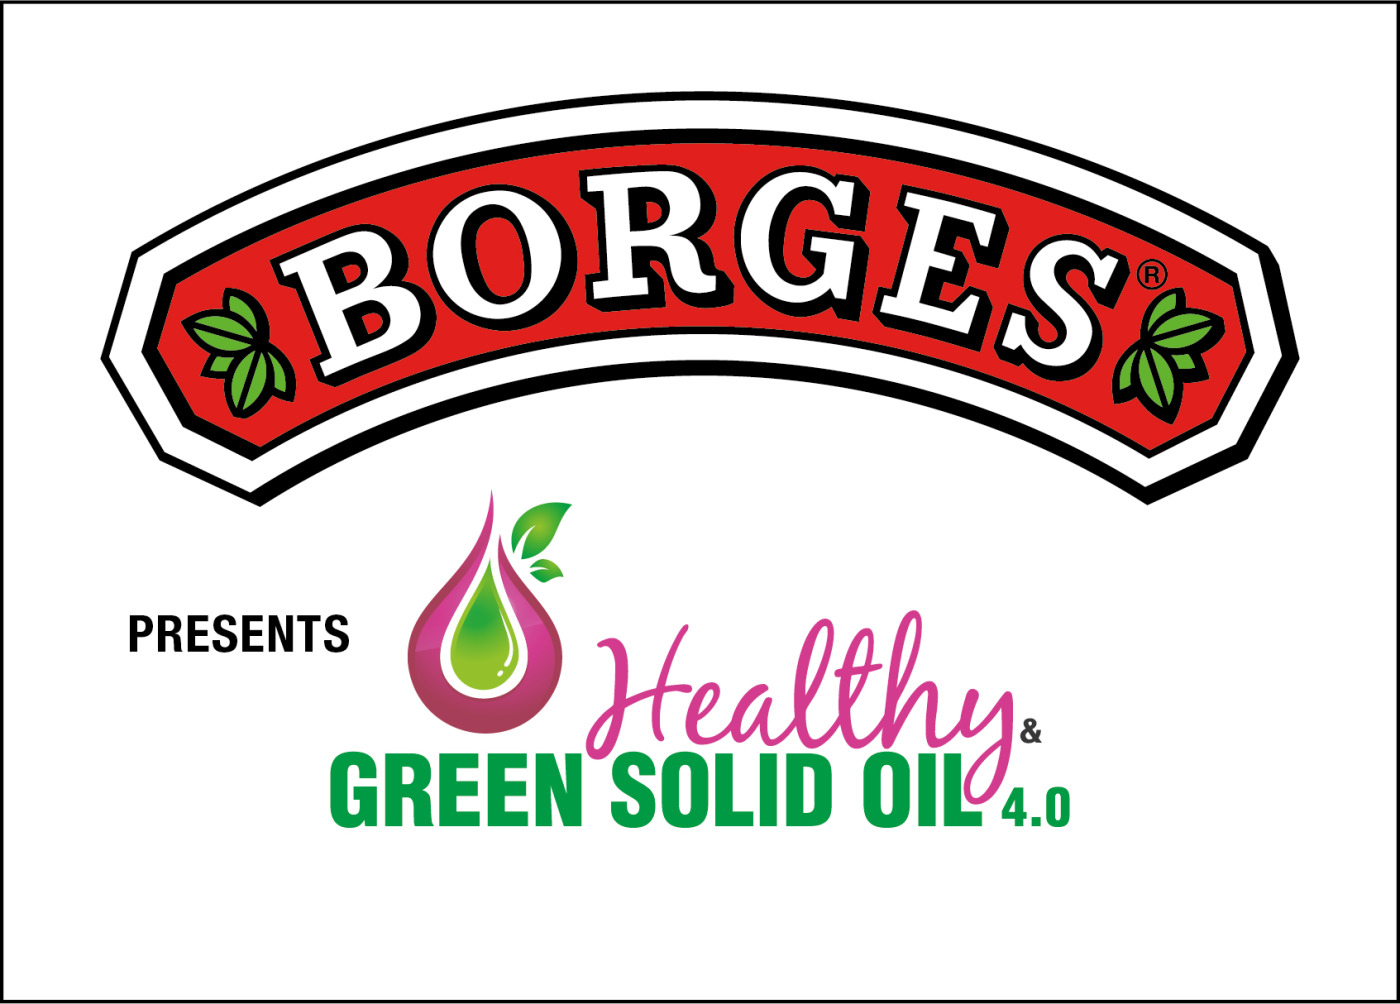 Borges Presents Green&Healthy Solid Oil